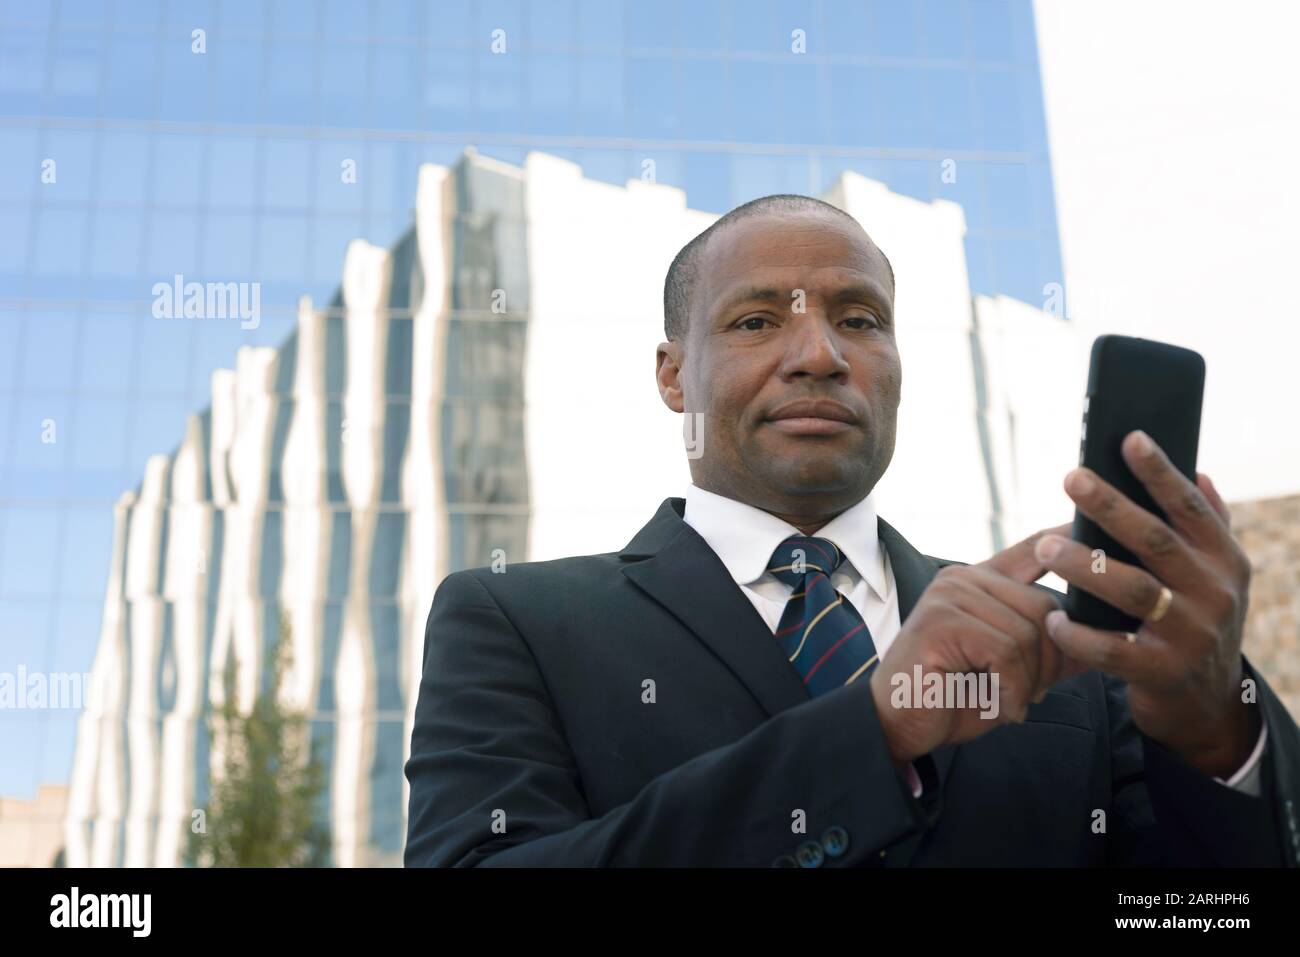 Black businessman in a suit looking successfull with a smartphone in an urban background Stock Photo